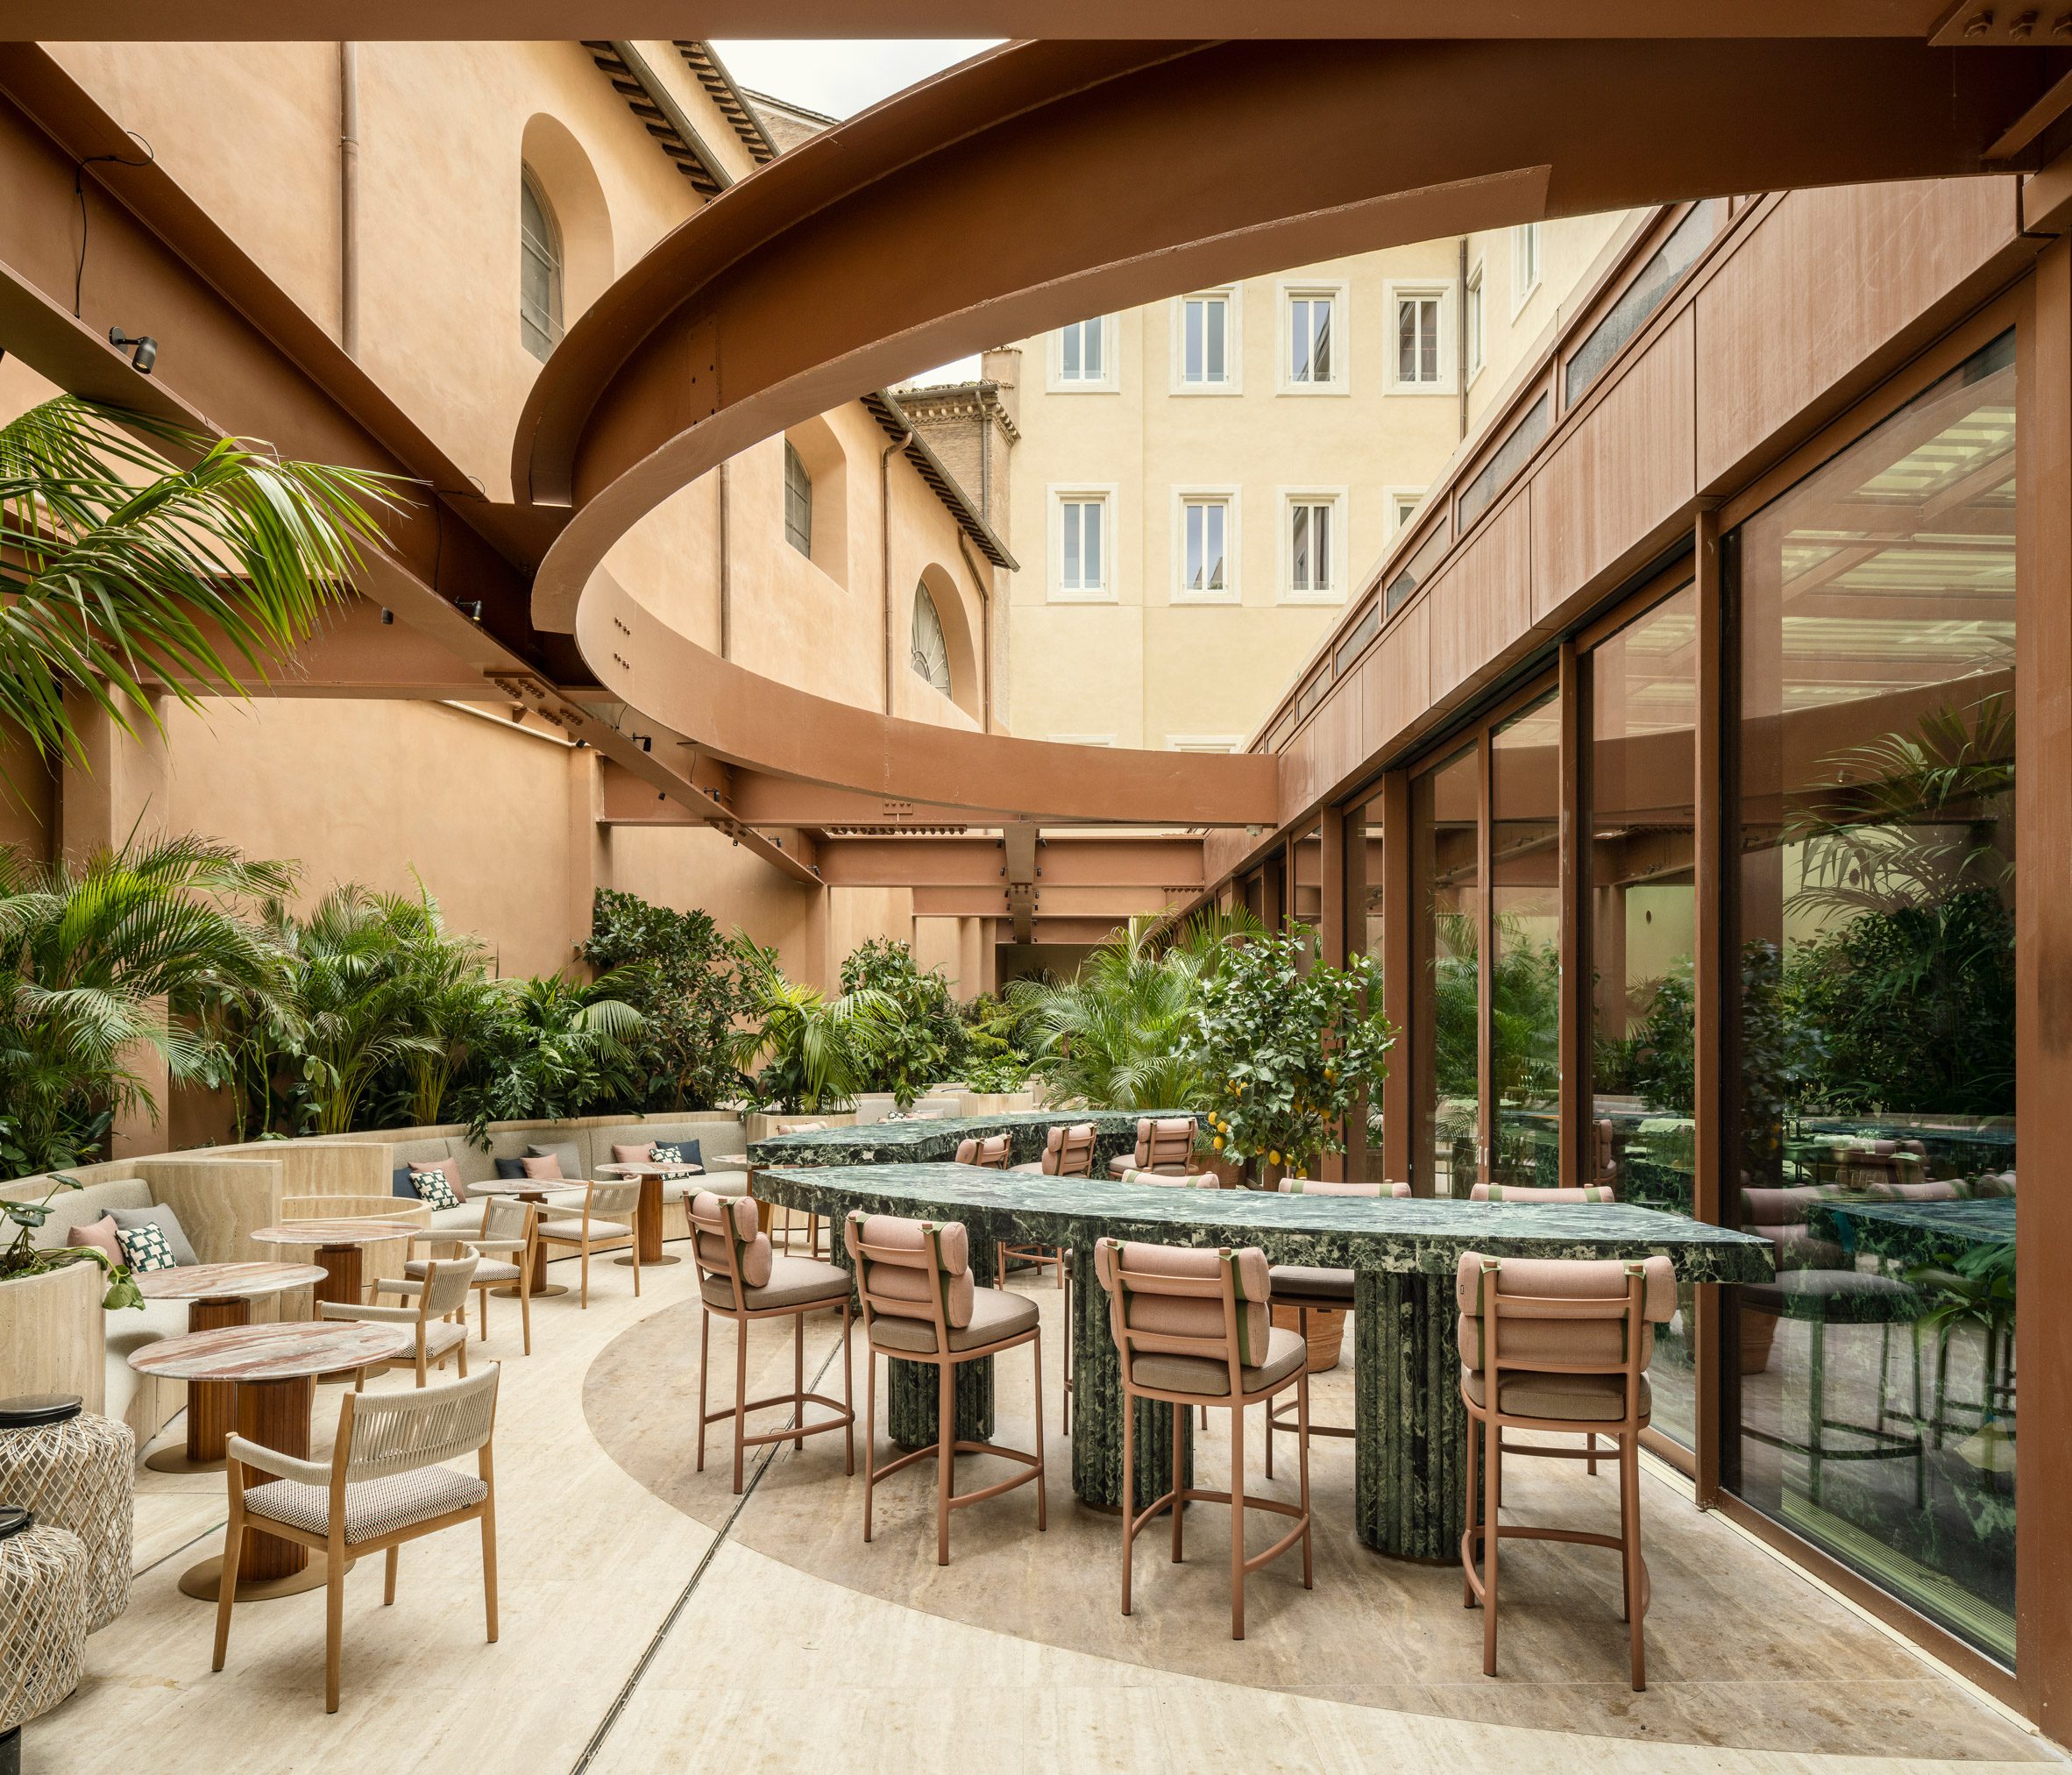 Courtyard with green marble bar counter below steelwork in Six Senses Rome hotel by Patricia Urquiola